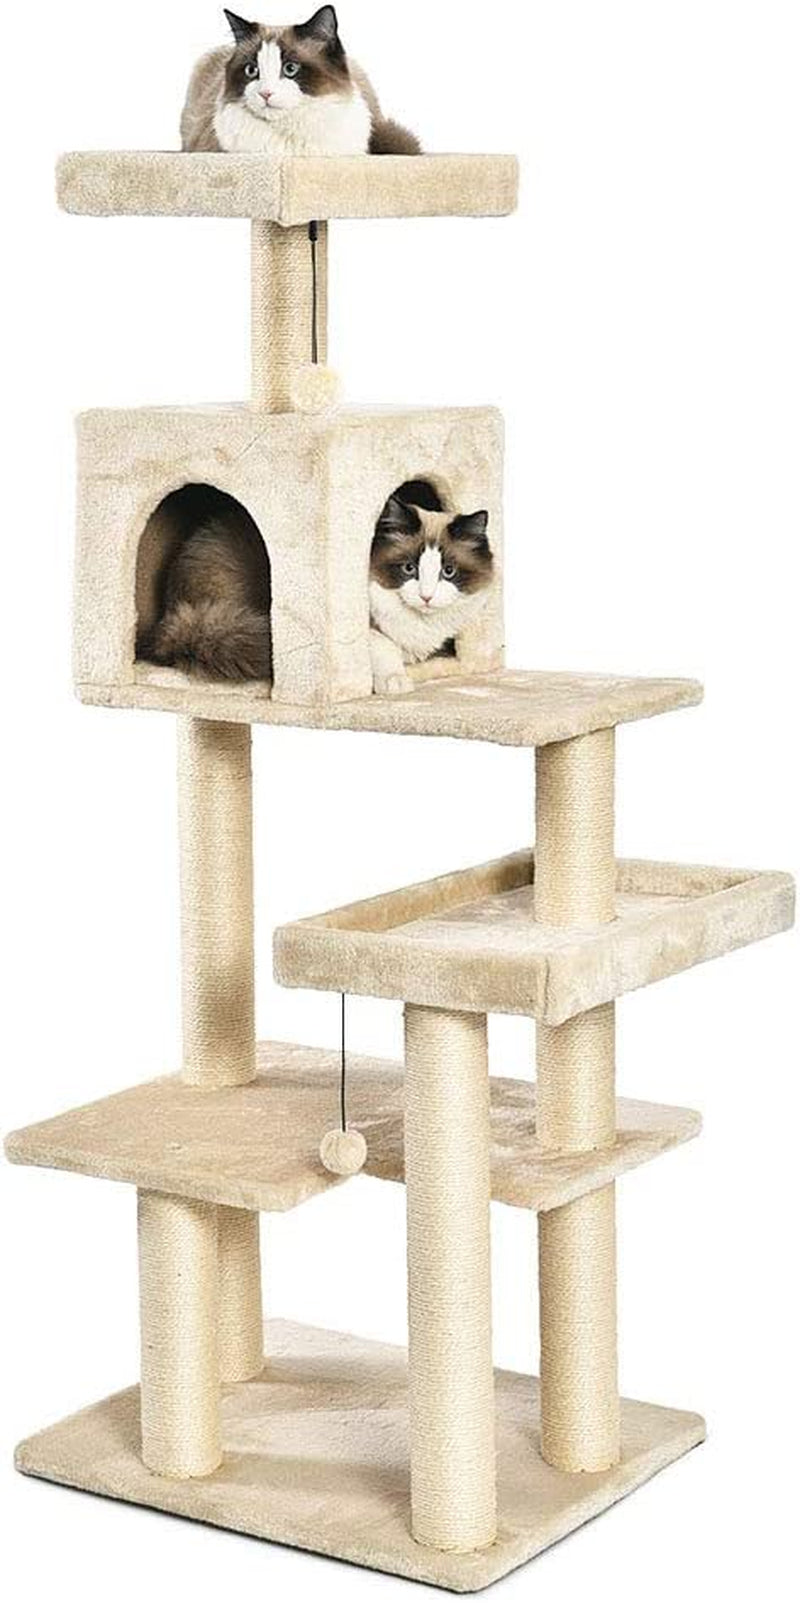 Extra Large Cat Tree Tower with Condo - 24 X 56 X 19 Inches, Beige